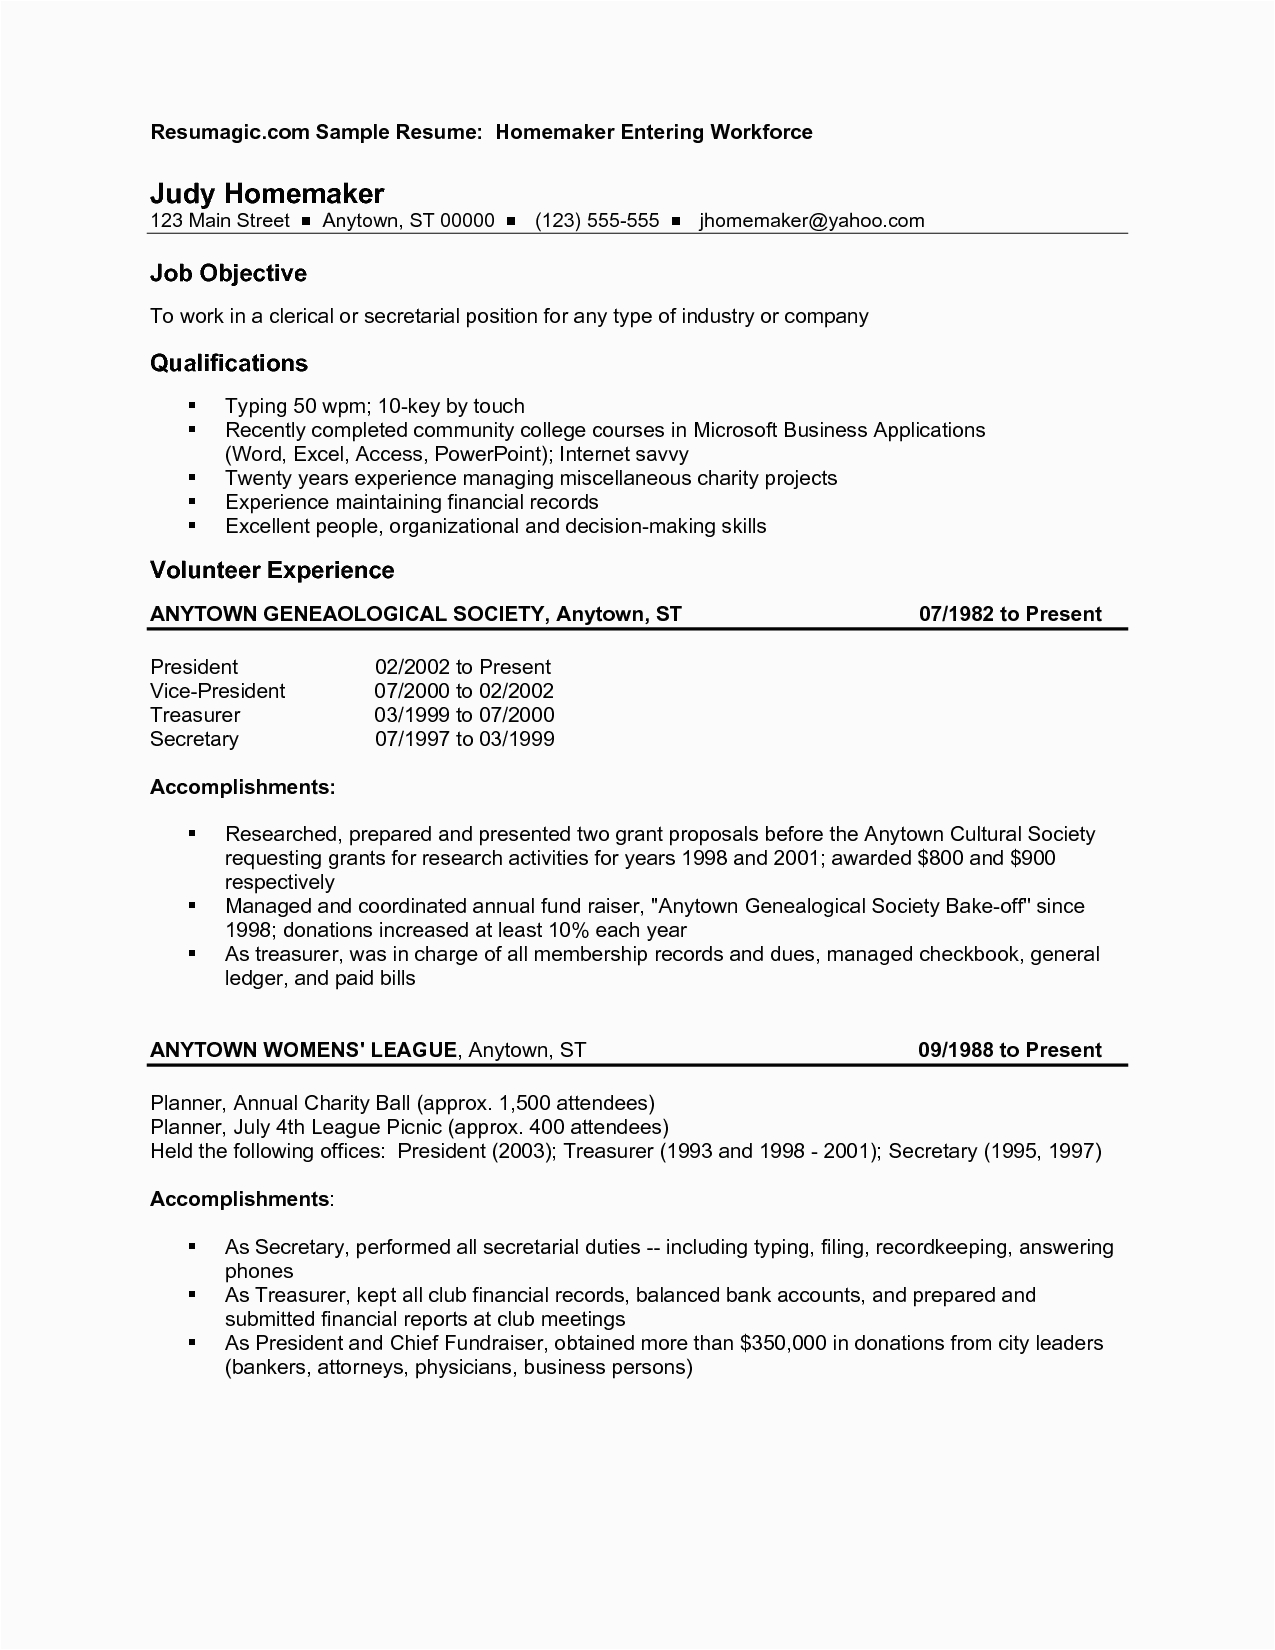 Mother Returning to Work Resume Sample How to Write A Resume for Mom Returning to Work Resume